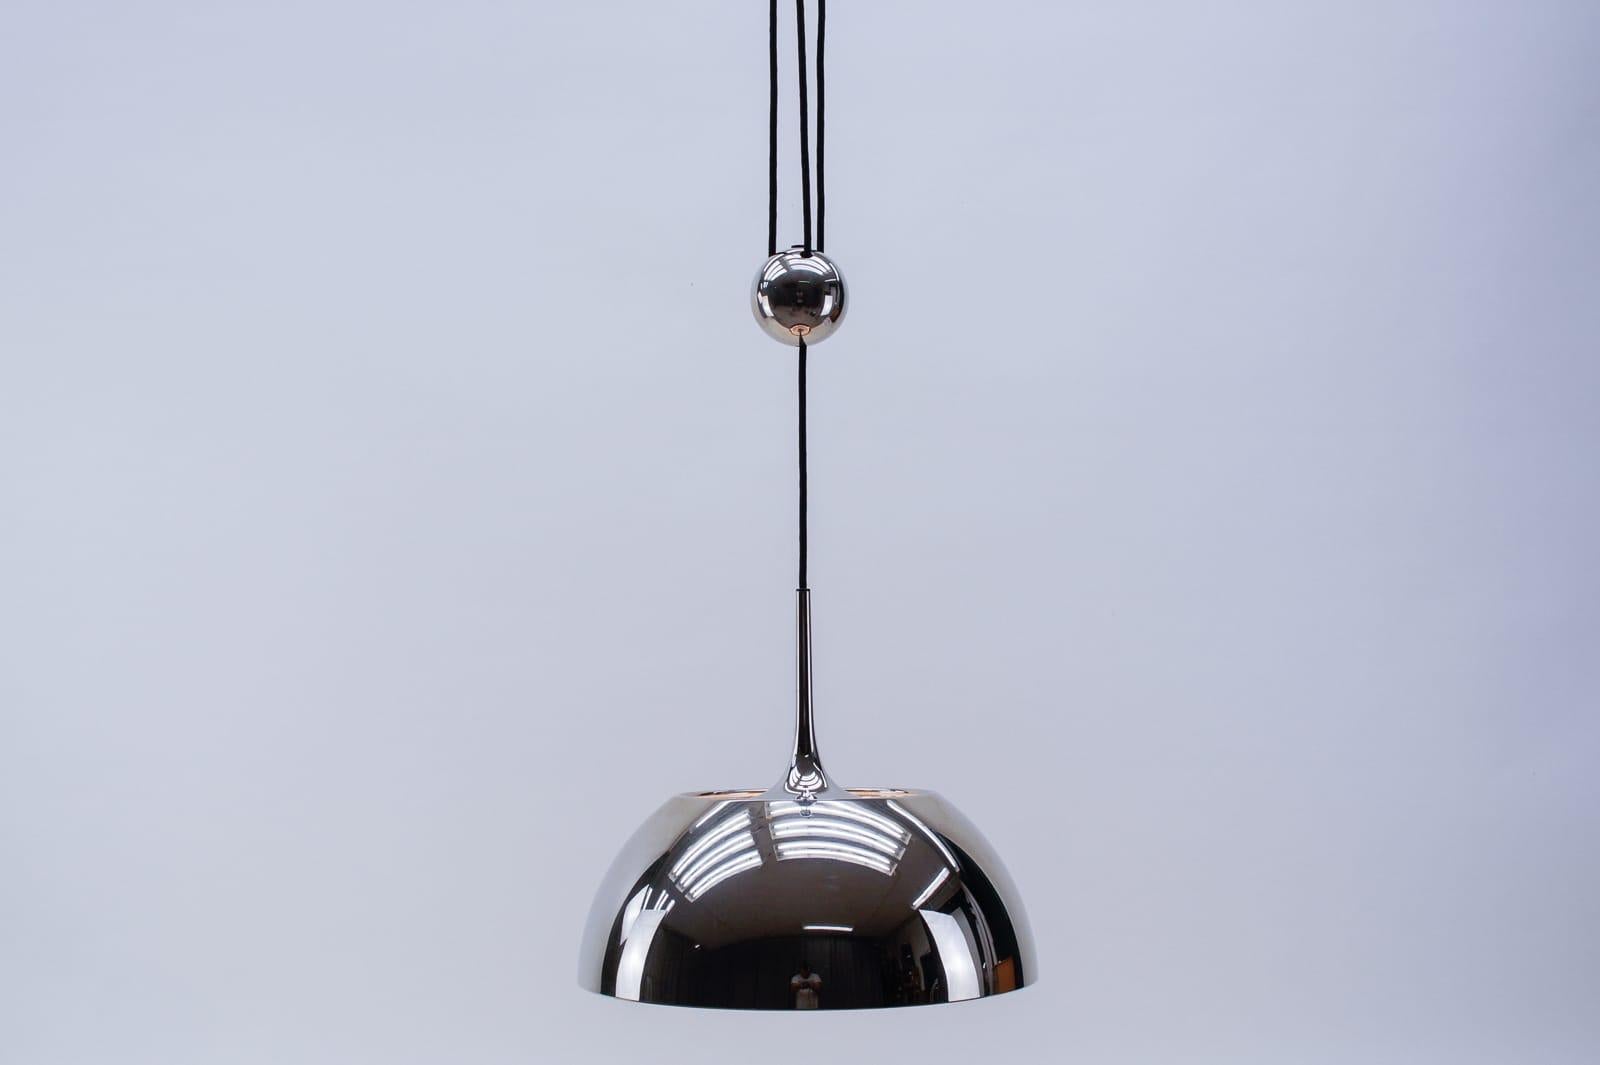 Florian Schulz Nickel Plated Pendant Lamp with Counterweight, Germany, 1970s In Good Condition For Sale In Nürnberg, Bayern